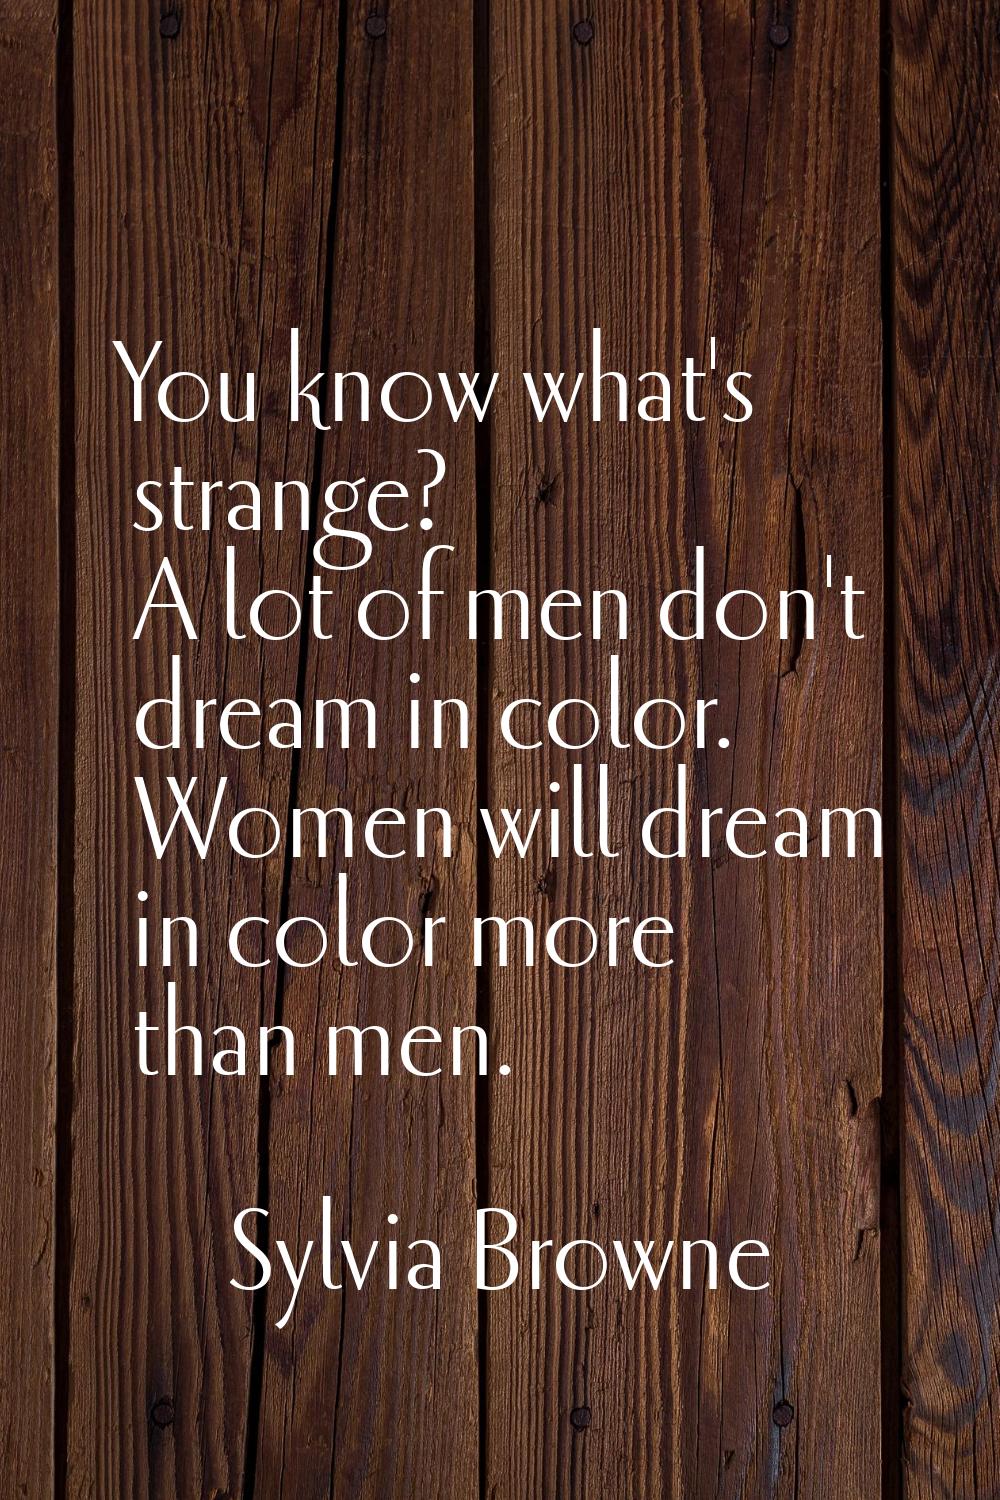 You know what's strange? A lot of men don't dream in color. Women will dream in color more than men